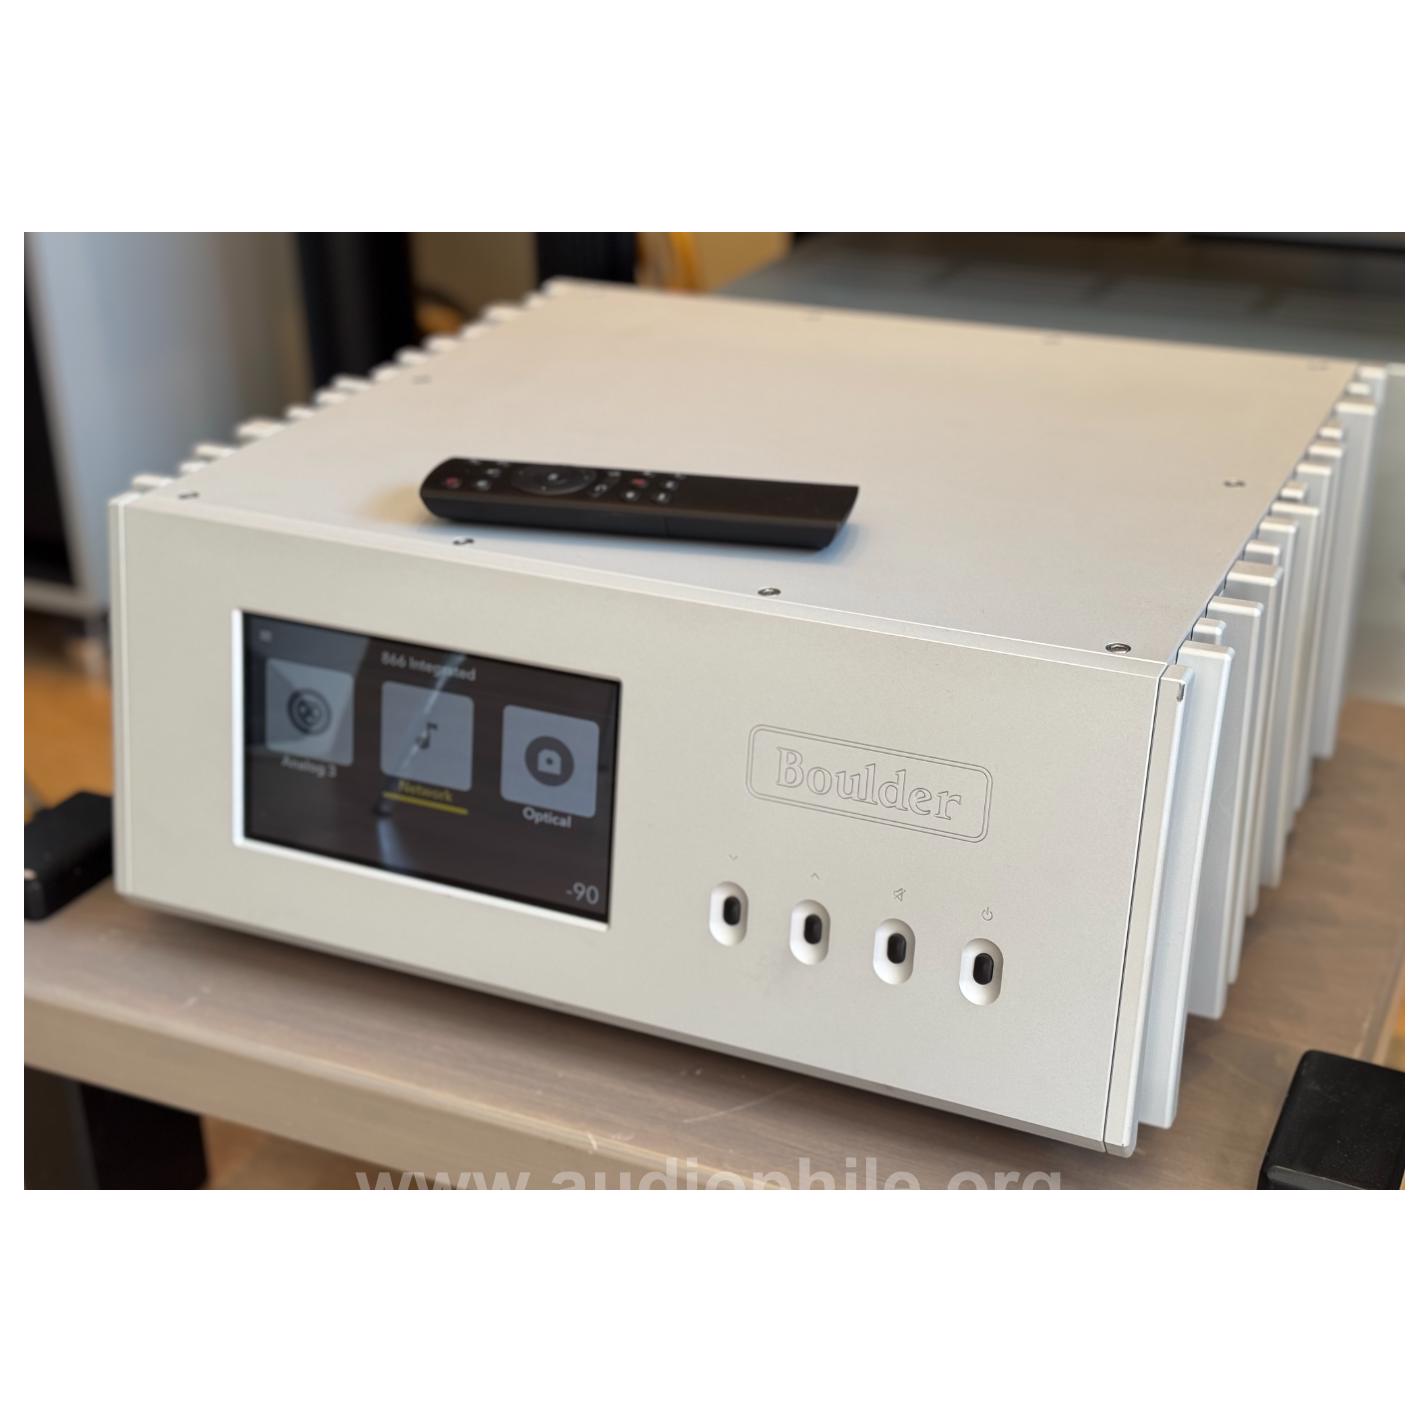 Boulder 866 stereo ıntegrated streaming amplifier, roon ready